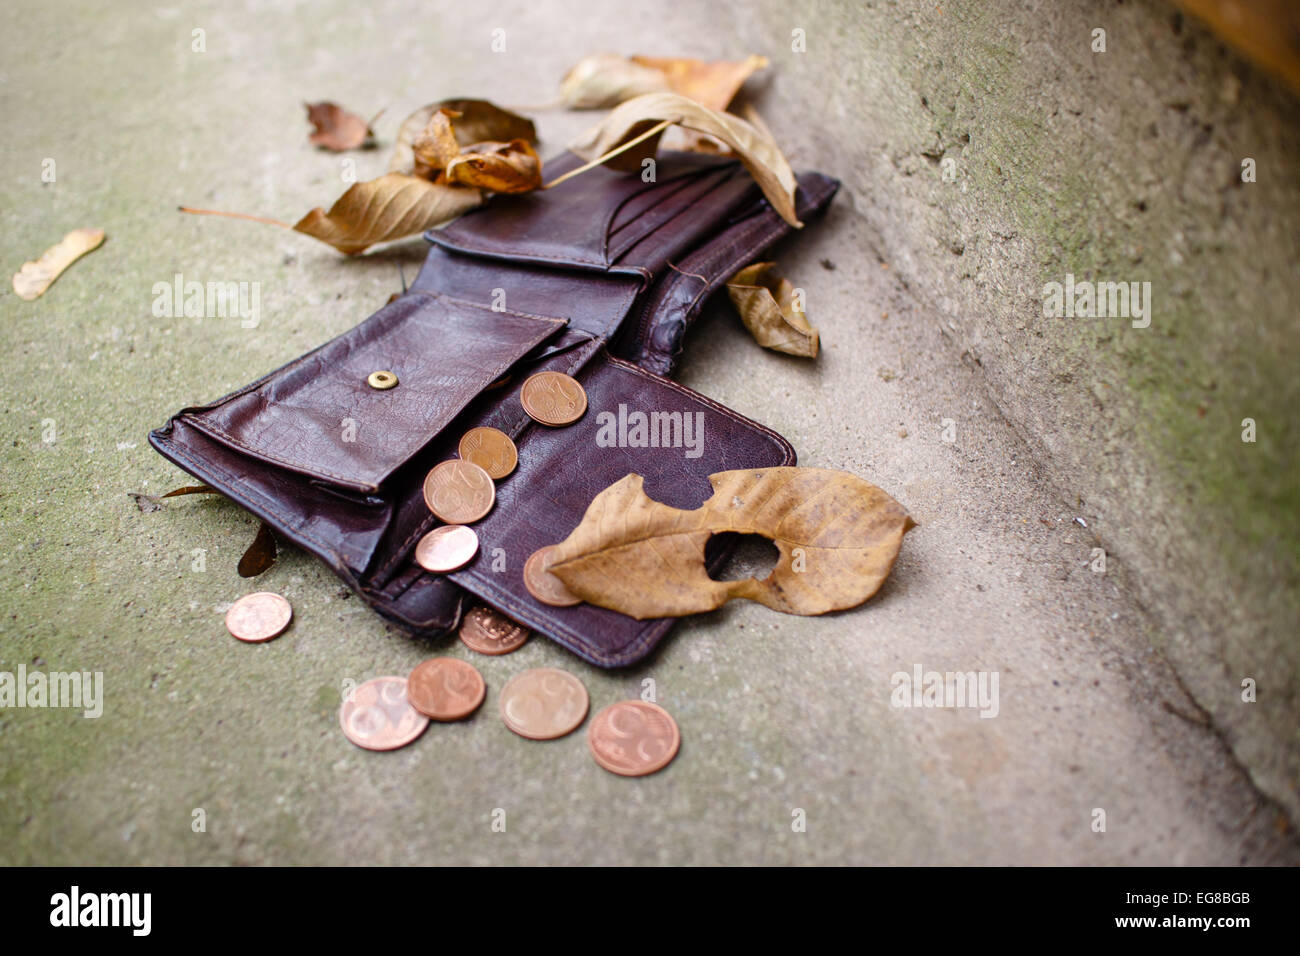 Old wallet with euro coins on concrete floor. Stock Photo